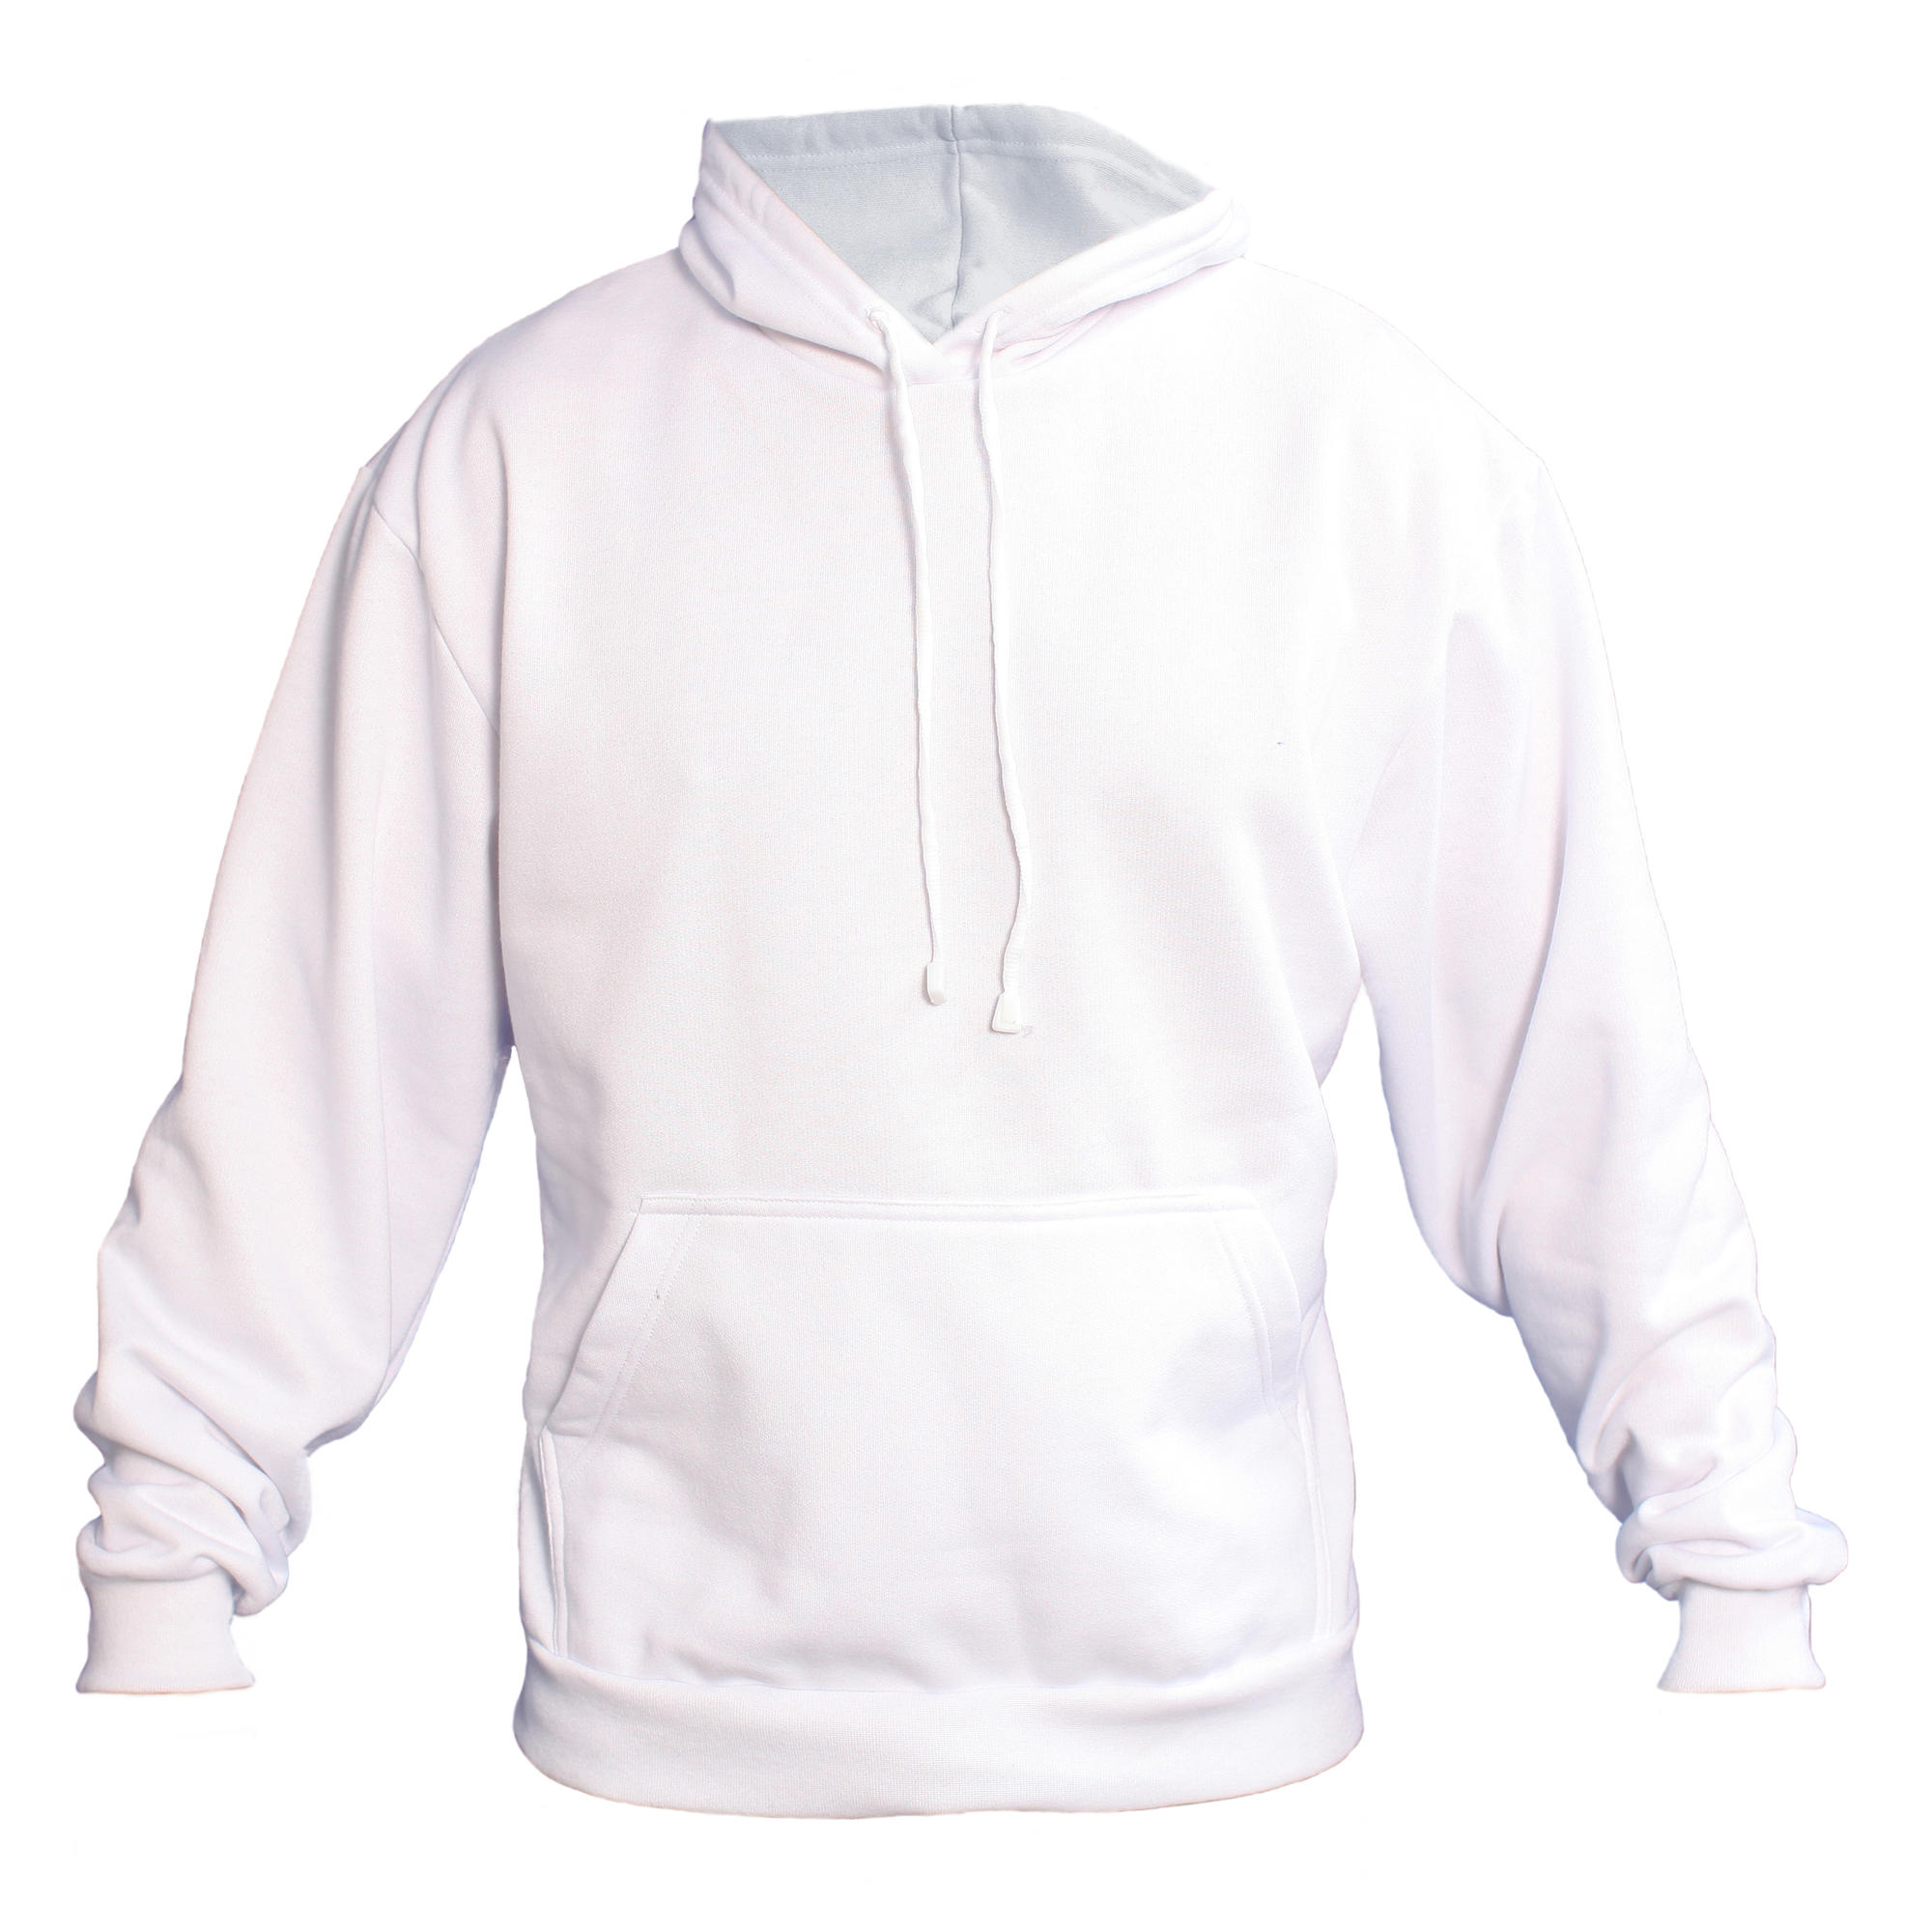 Sublimation Hoodie Sweat Shirt,Sublimation Hoodie Sweat Shirt White, 6 ...